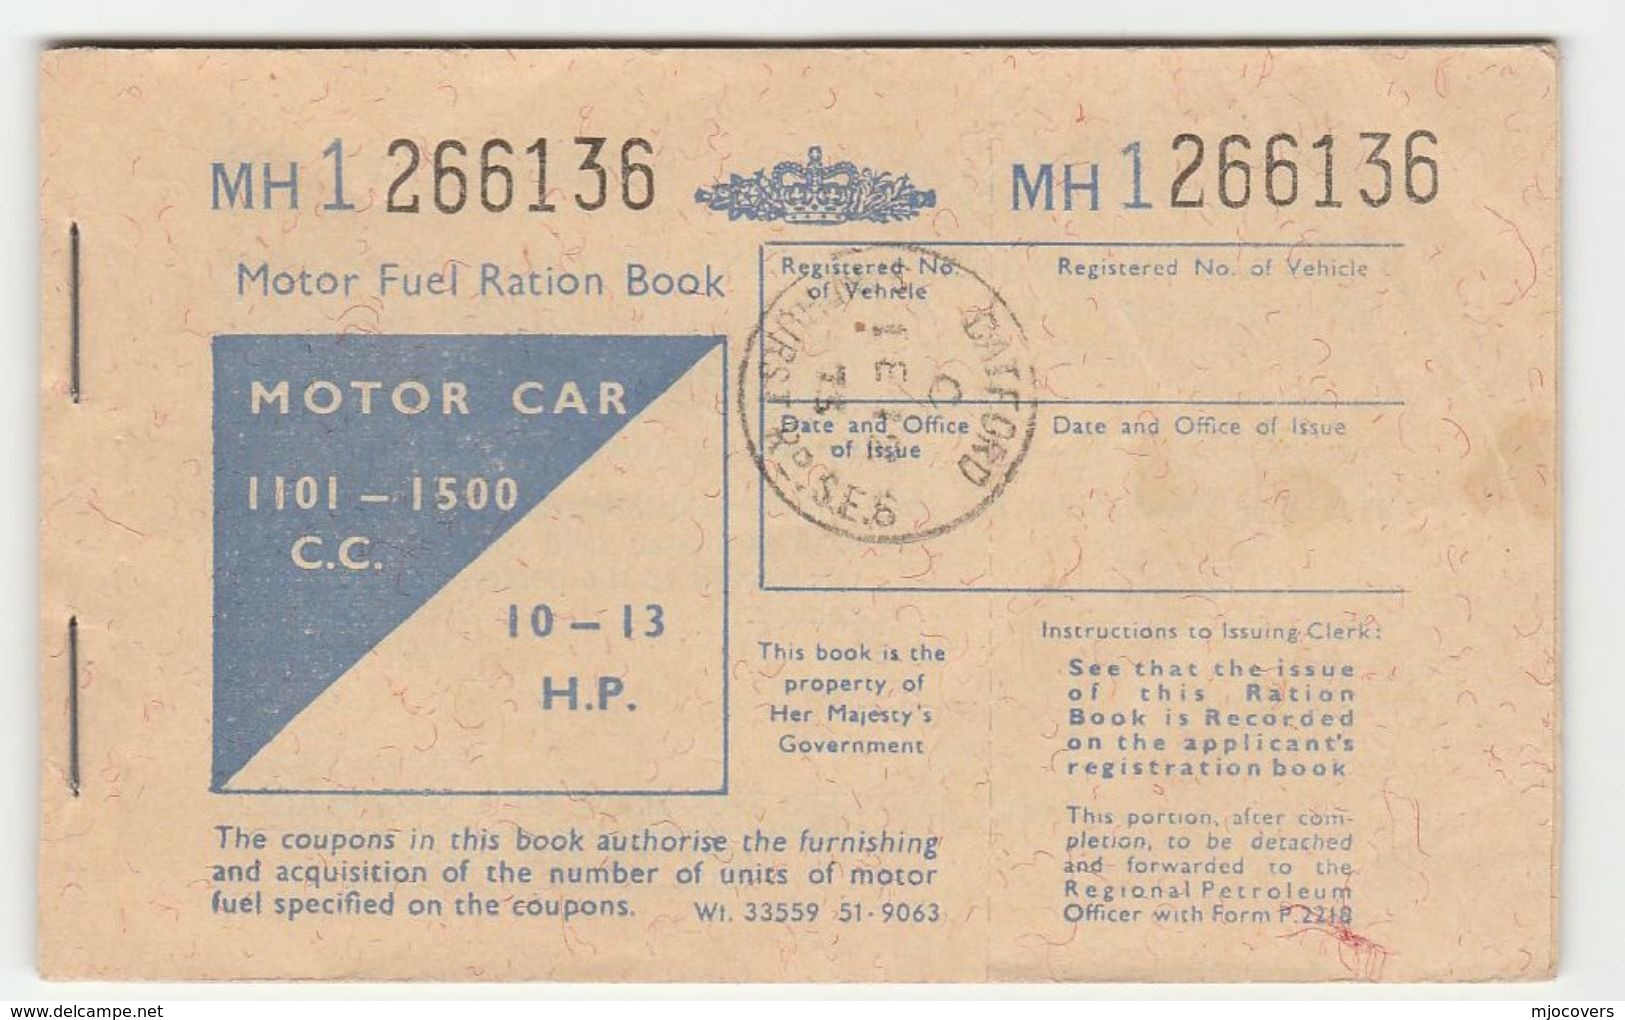 1973 Catford FUEL CRISIS - BRITISH MOTOR FUEL RATION BOOK Complete, For 1101-1500cc CAR Oil Petrochemicals Energy - Historical Documents